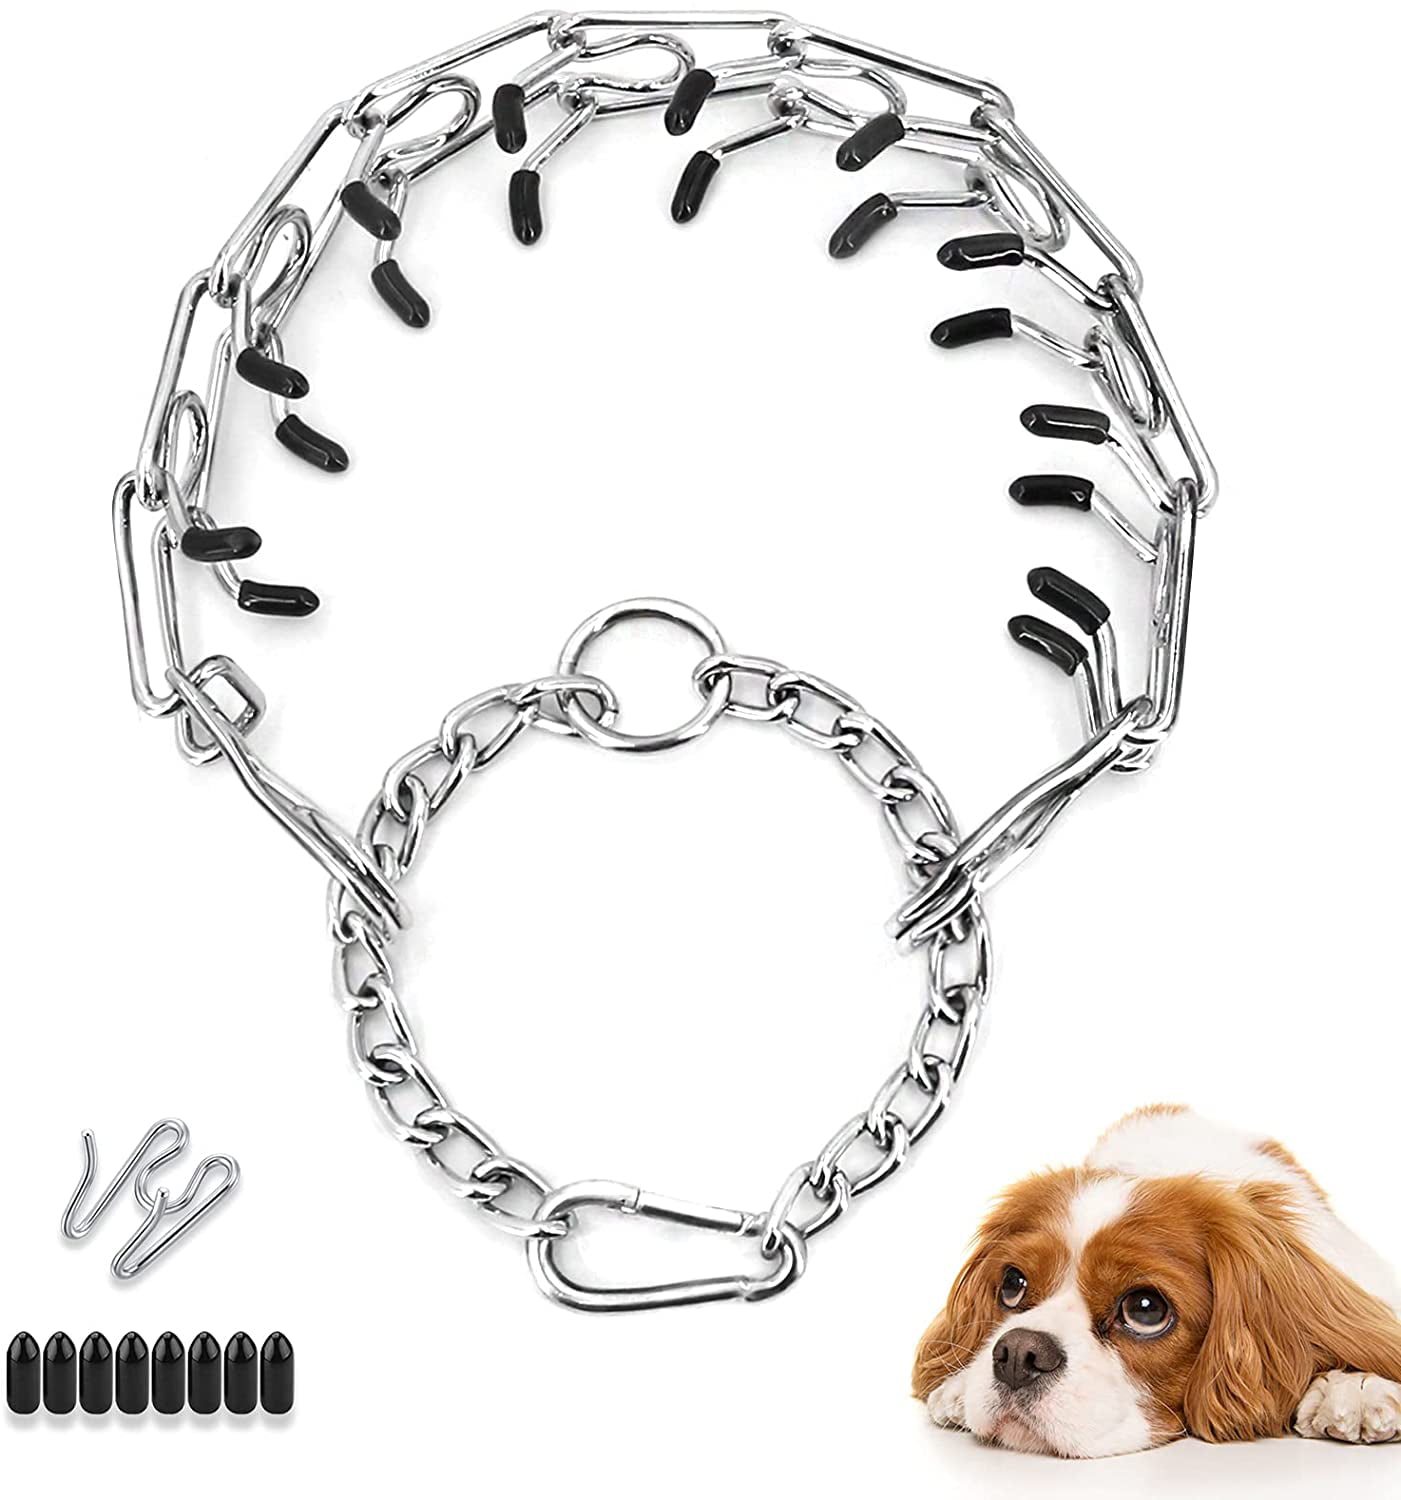 Dog Prong Collar Come with Protective Rubber Tips Dog Training Collar Adjustable Stainless Dog Choke Pinch Collar with Quick Release Locking Carabiner for Small Medium Large Dogs